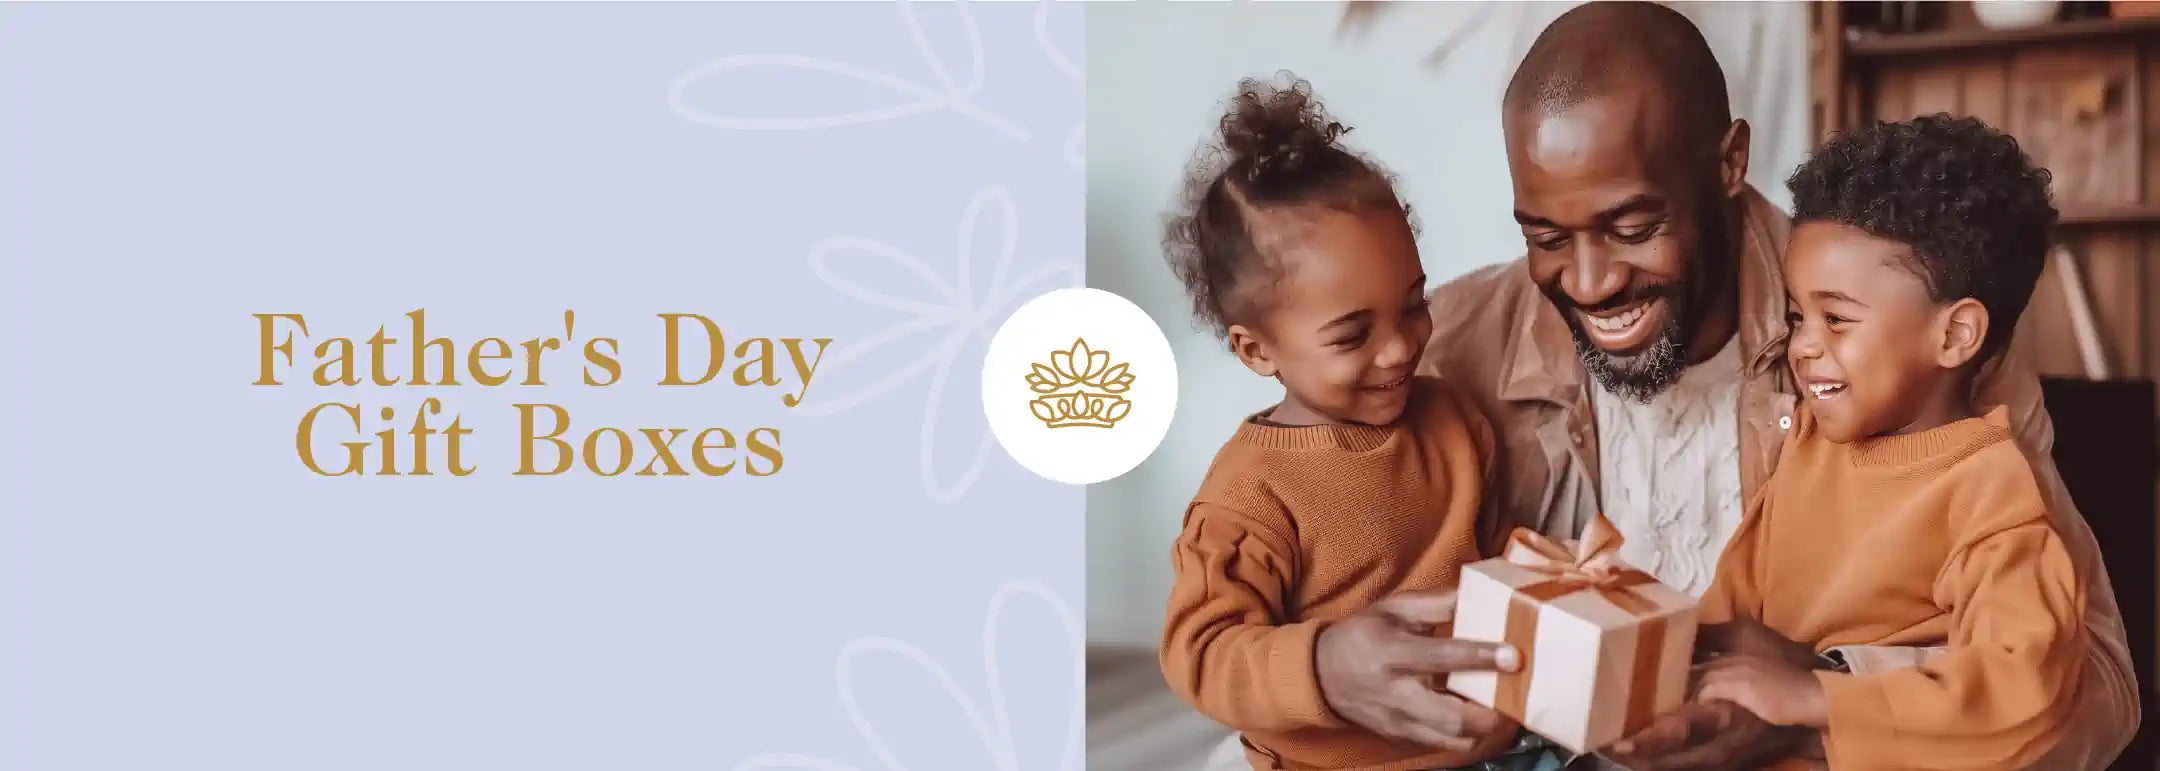 A heartwarming family moment with a father and his two children smiling joyfully as they share a gift box on Father's Day, exuding warmth and love - Fabulous Flowers and Gifts.